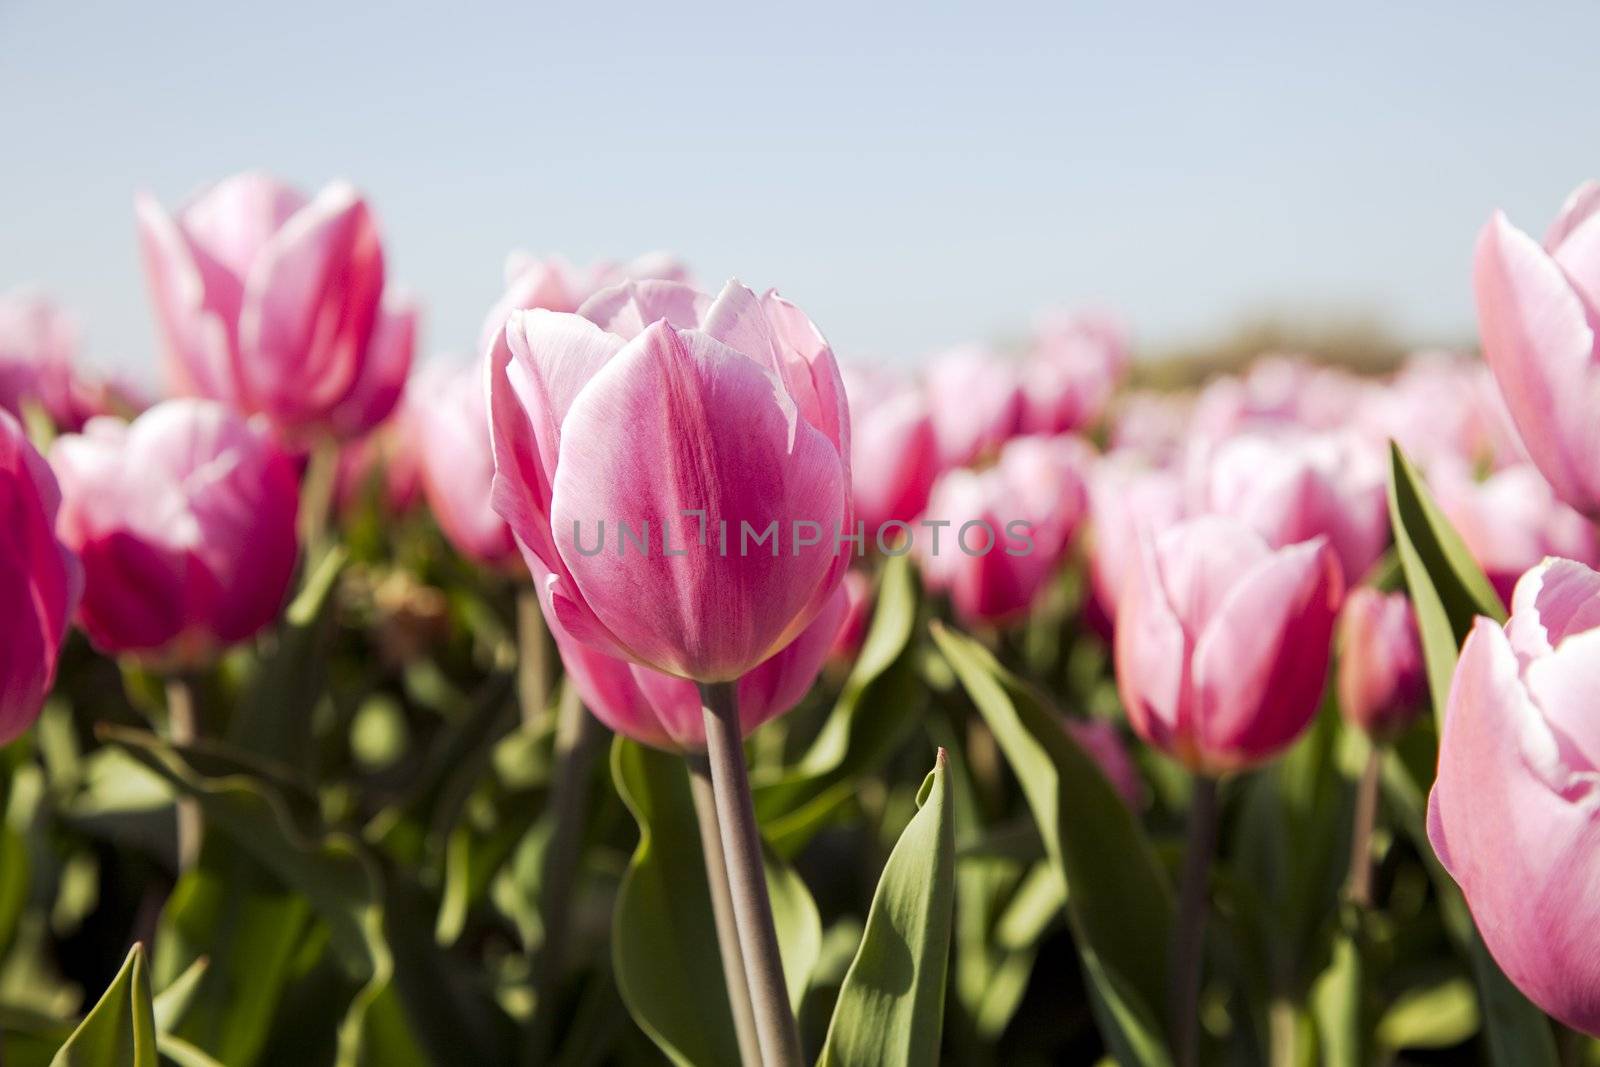 Pink Tulips in Holland by charlotteLake